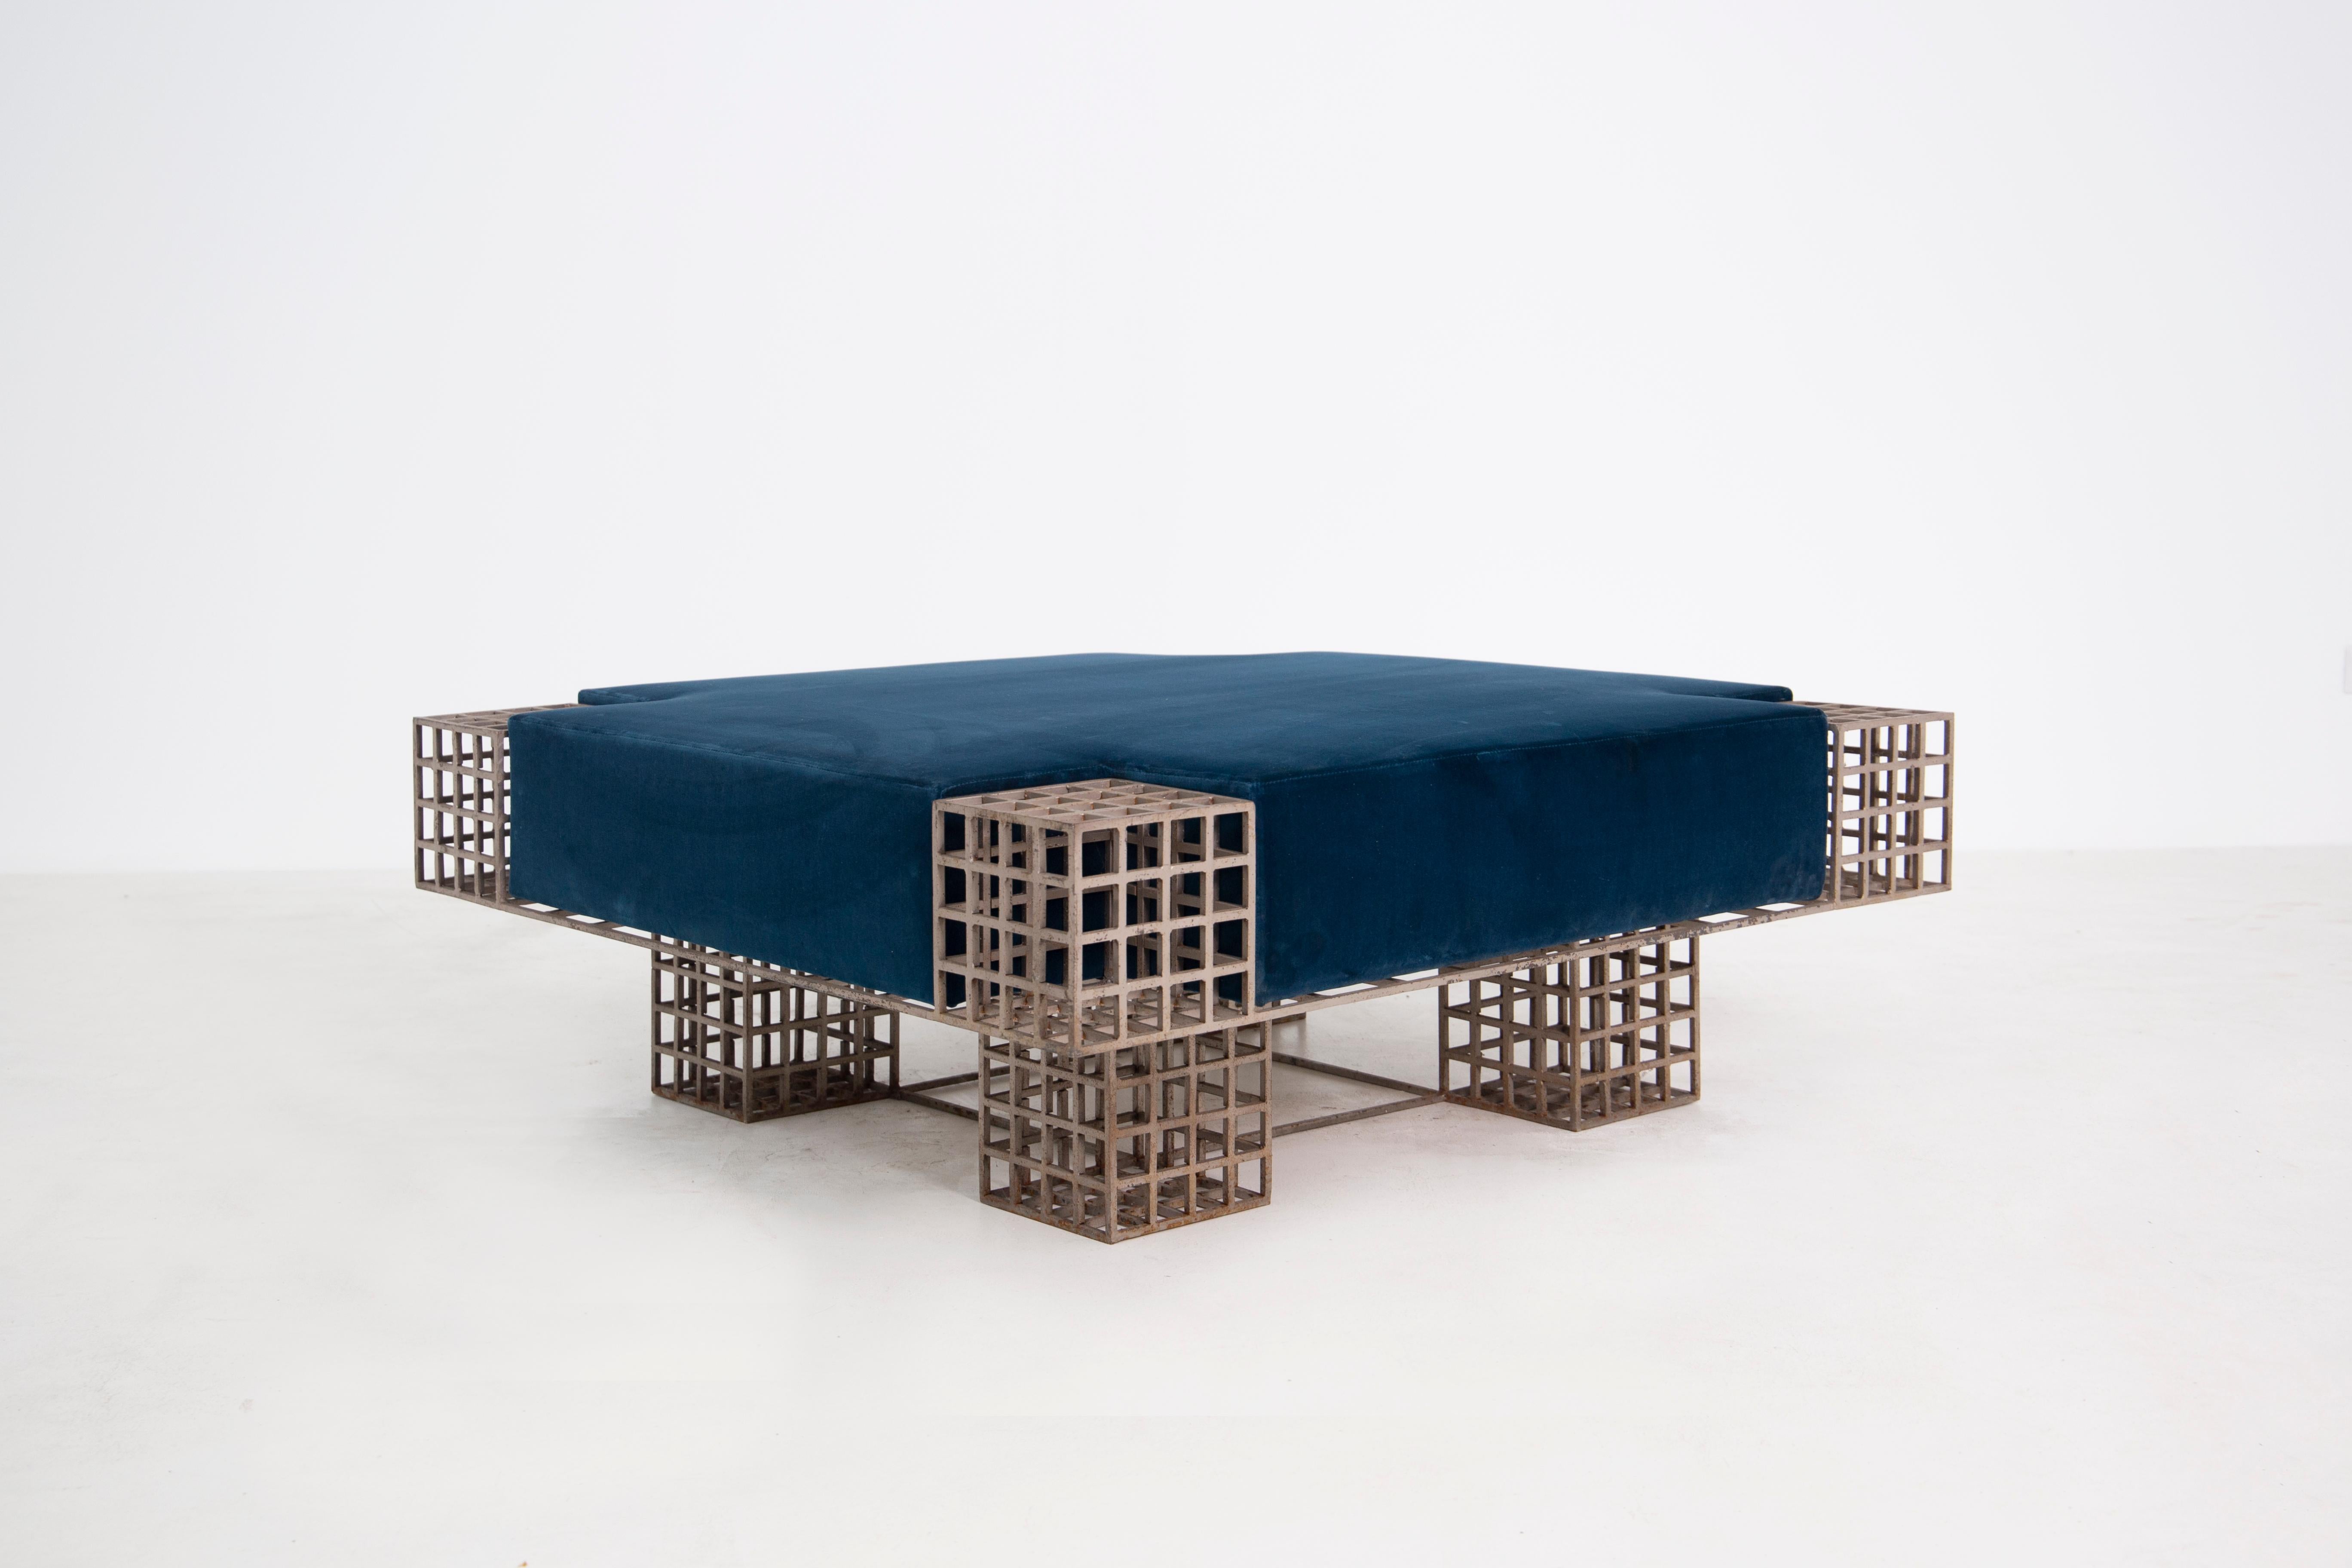 Sculptural square center bench designed by the famous Italian gallerist and publisher Carla Sozzani. The bench is from 1970. Its metal structure made with modular design creates a perfect symmetry with the module and sculpture. The bench seems to